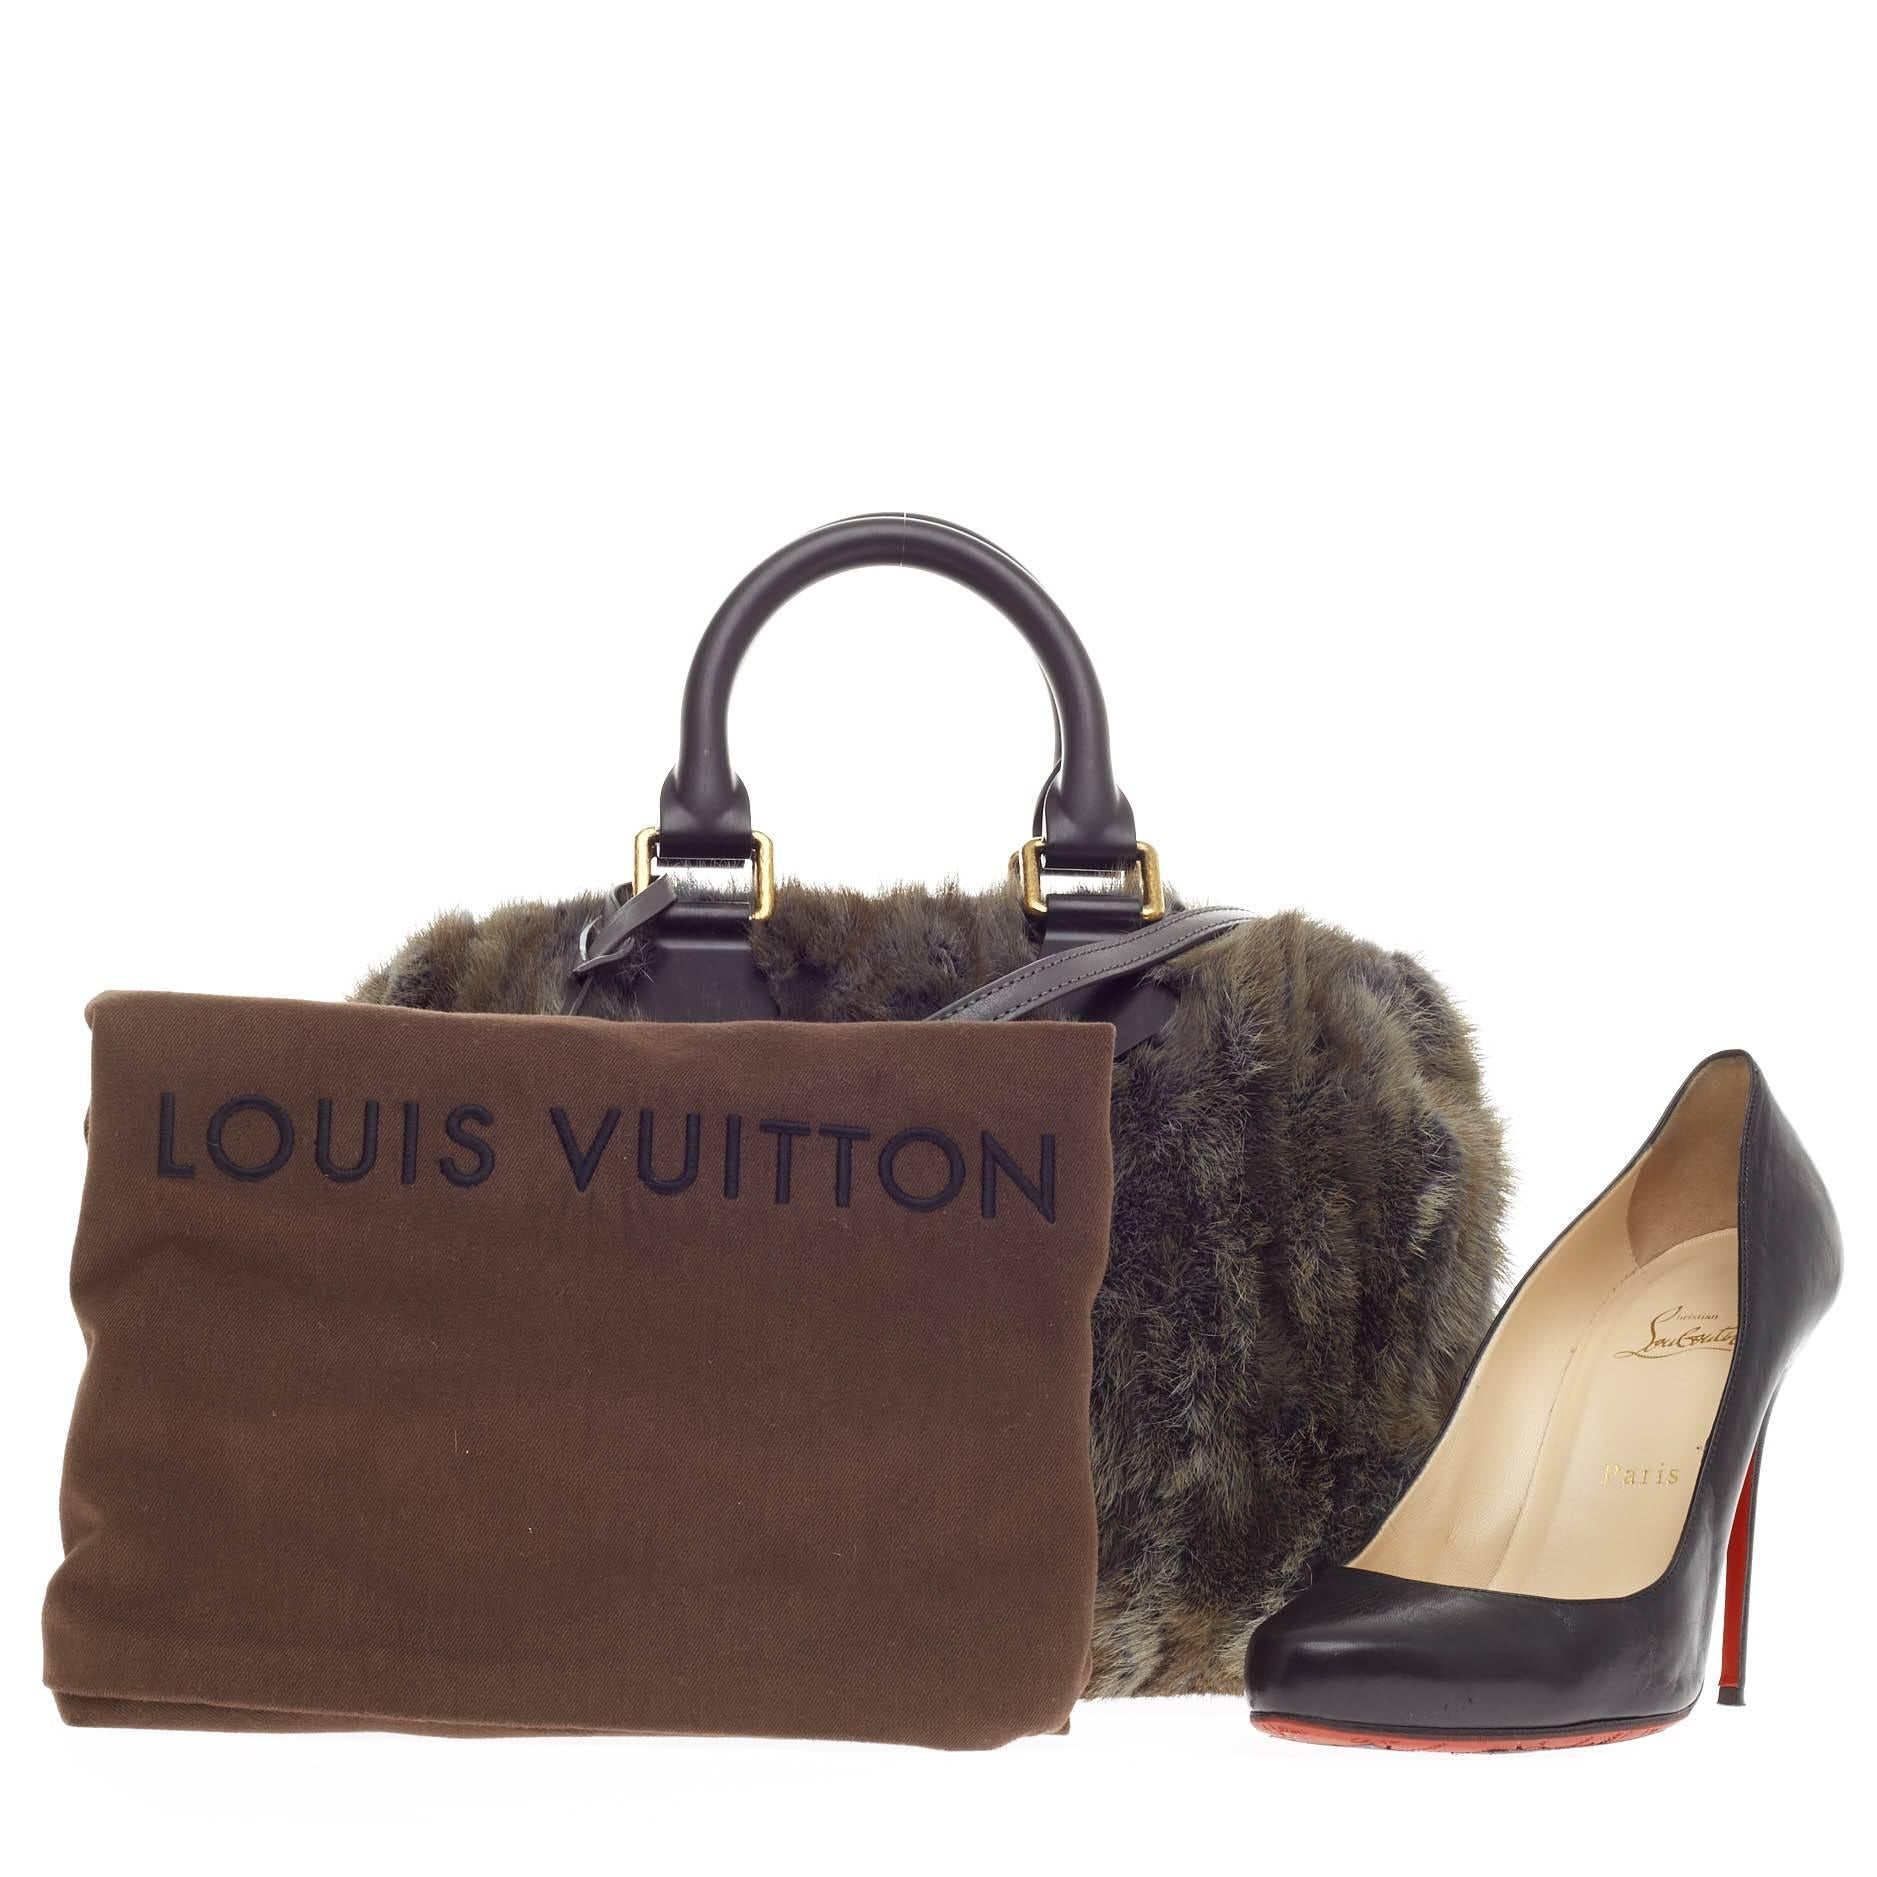 This authentic Louis Vuitton Speedy Limited Edition Caresse Mink 25 is a rare and luxurious piece that is a must-have for any Louis Vuitton lover and collector. Released during the brand's Fall/Winter 2013-2014 Collection, this rare speedy is